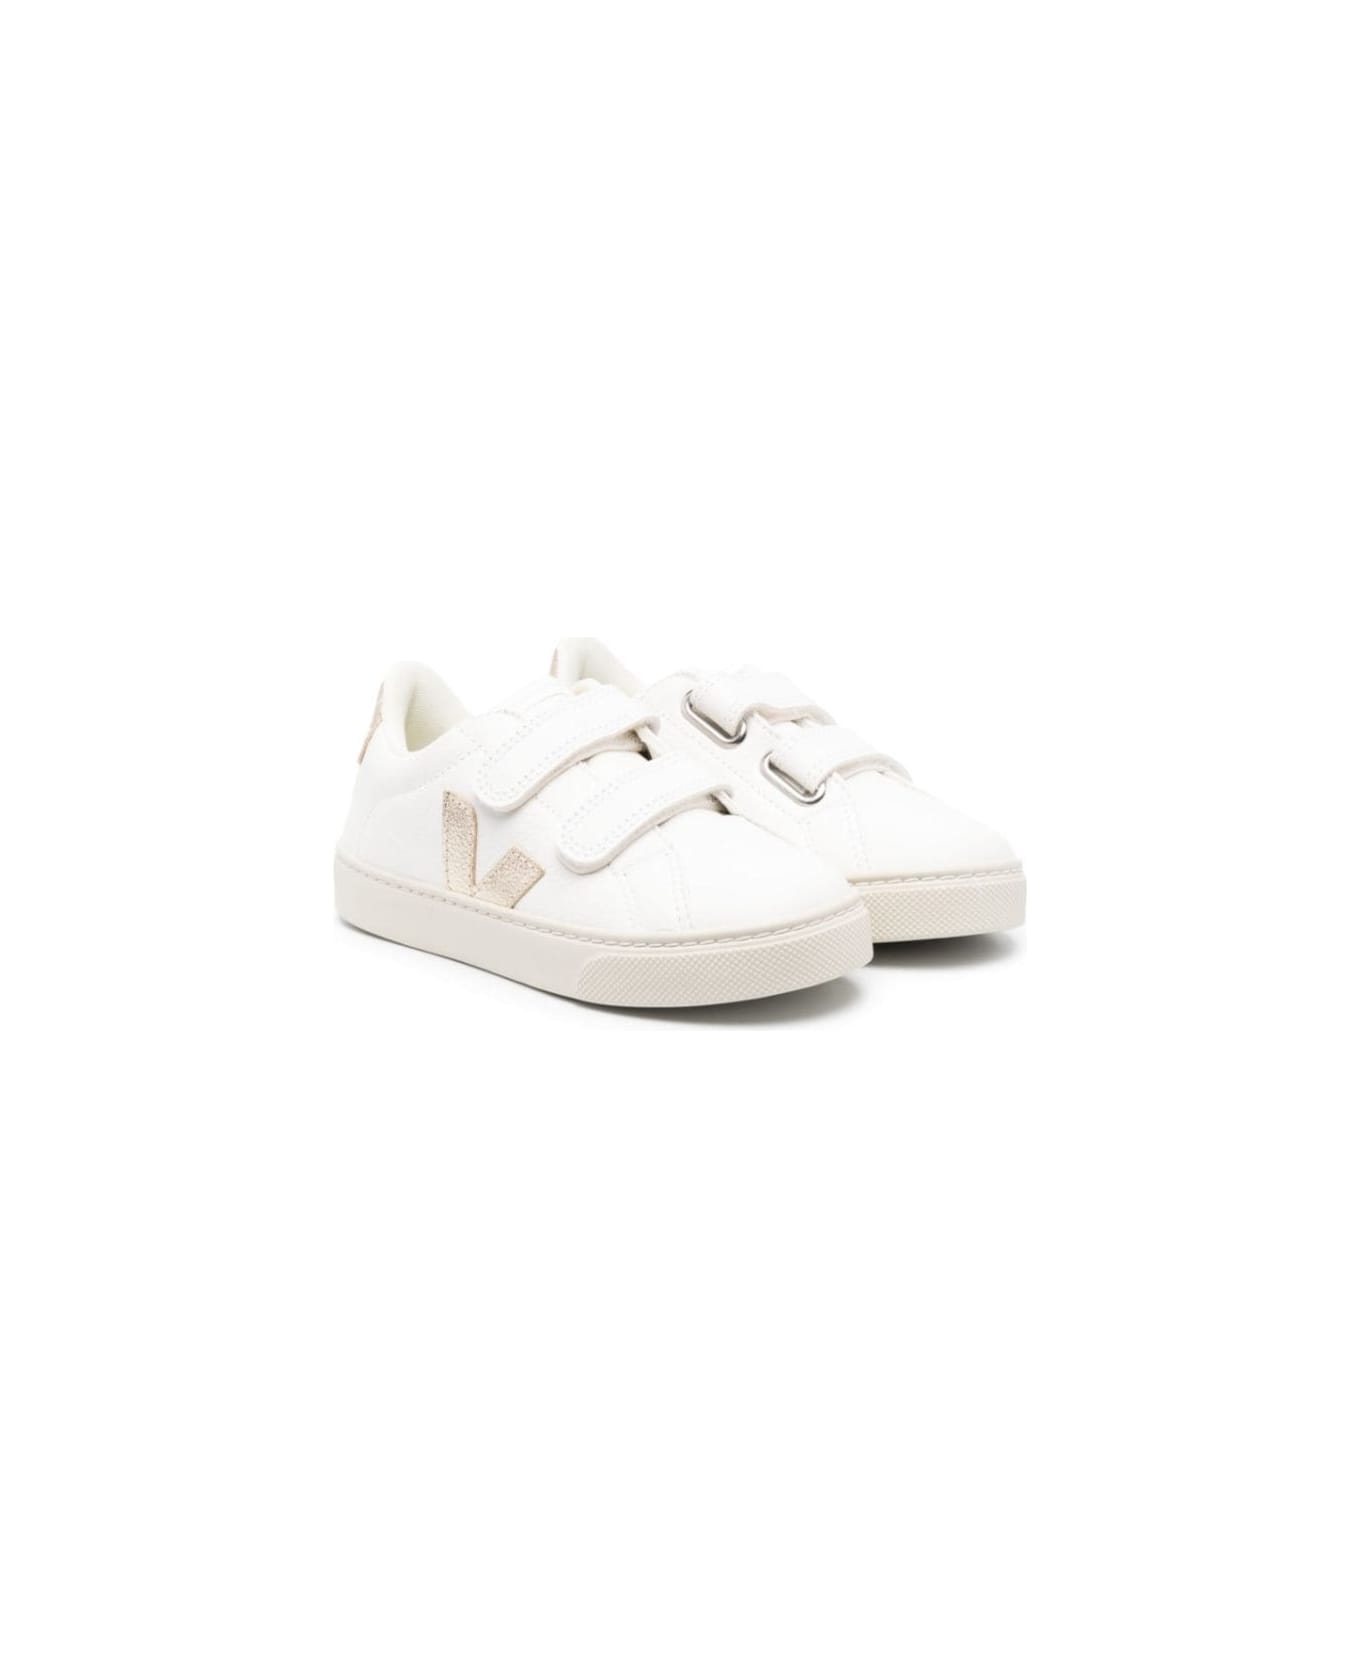 Veja White Sneaker With Platinum Logo And Heel Tab In Leather Girl - White